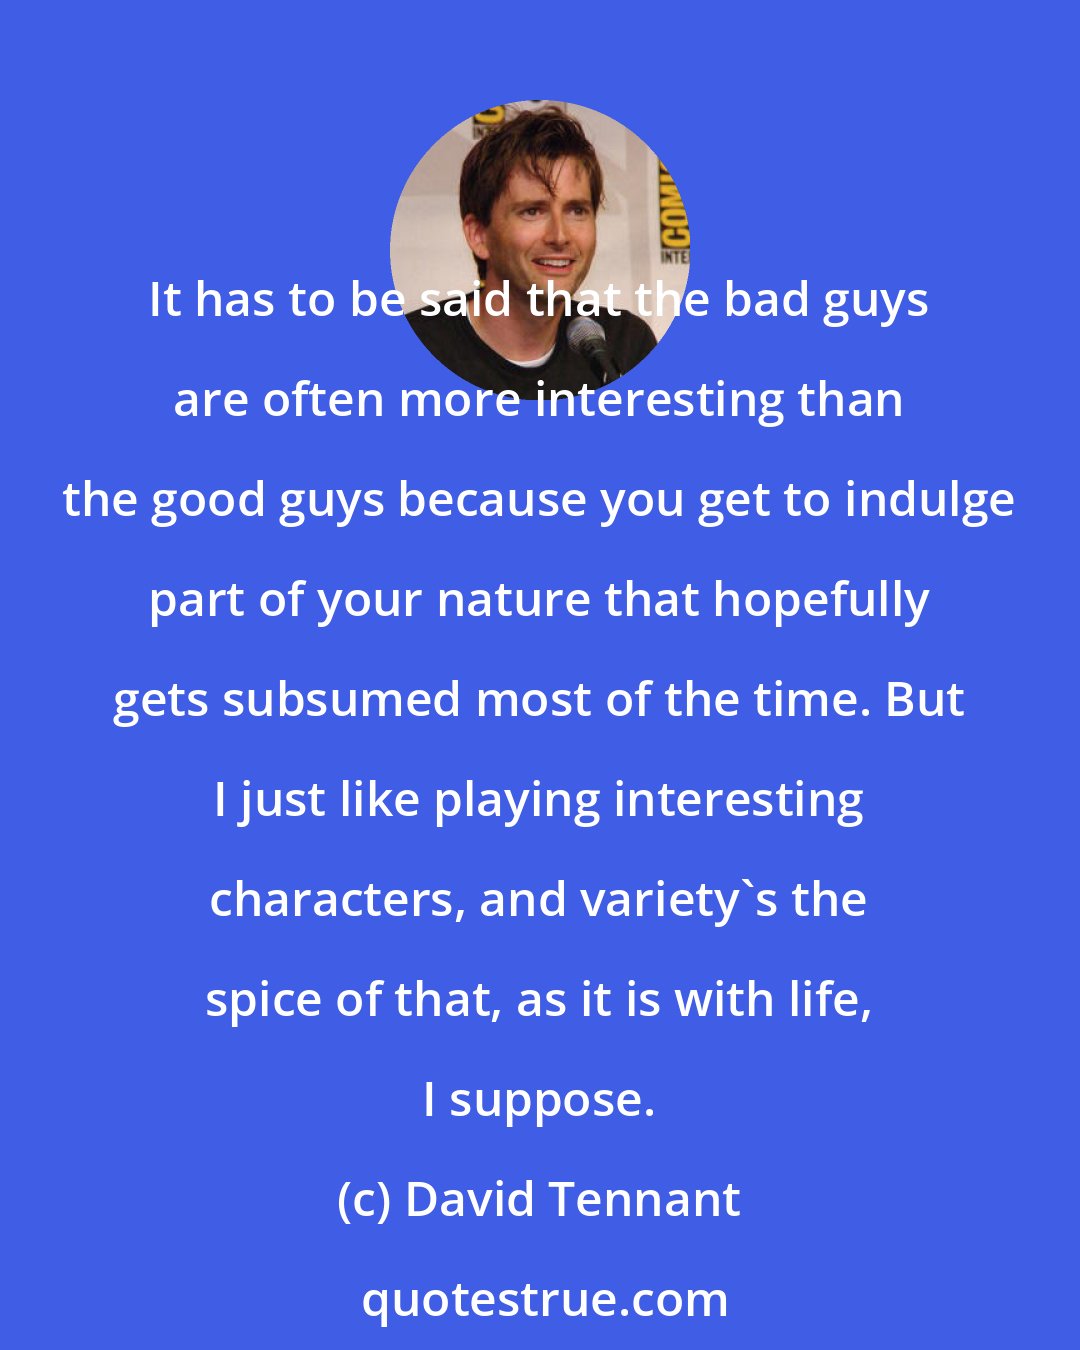 David Tennant: It has to be said that the bad guys are often more interesting than the good guys because you get to indulge part of your nature that hopefully gets subsumed most of the time. But I just like playing interesting characters, and variety's the spice of that, as it is with life, I suppose.